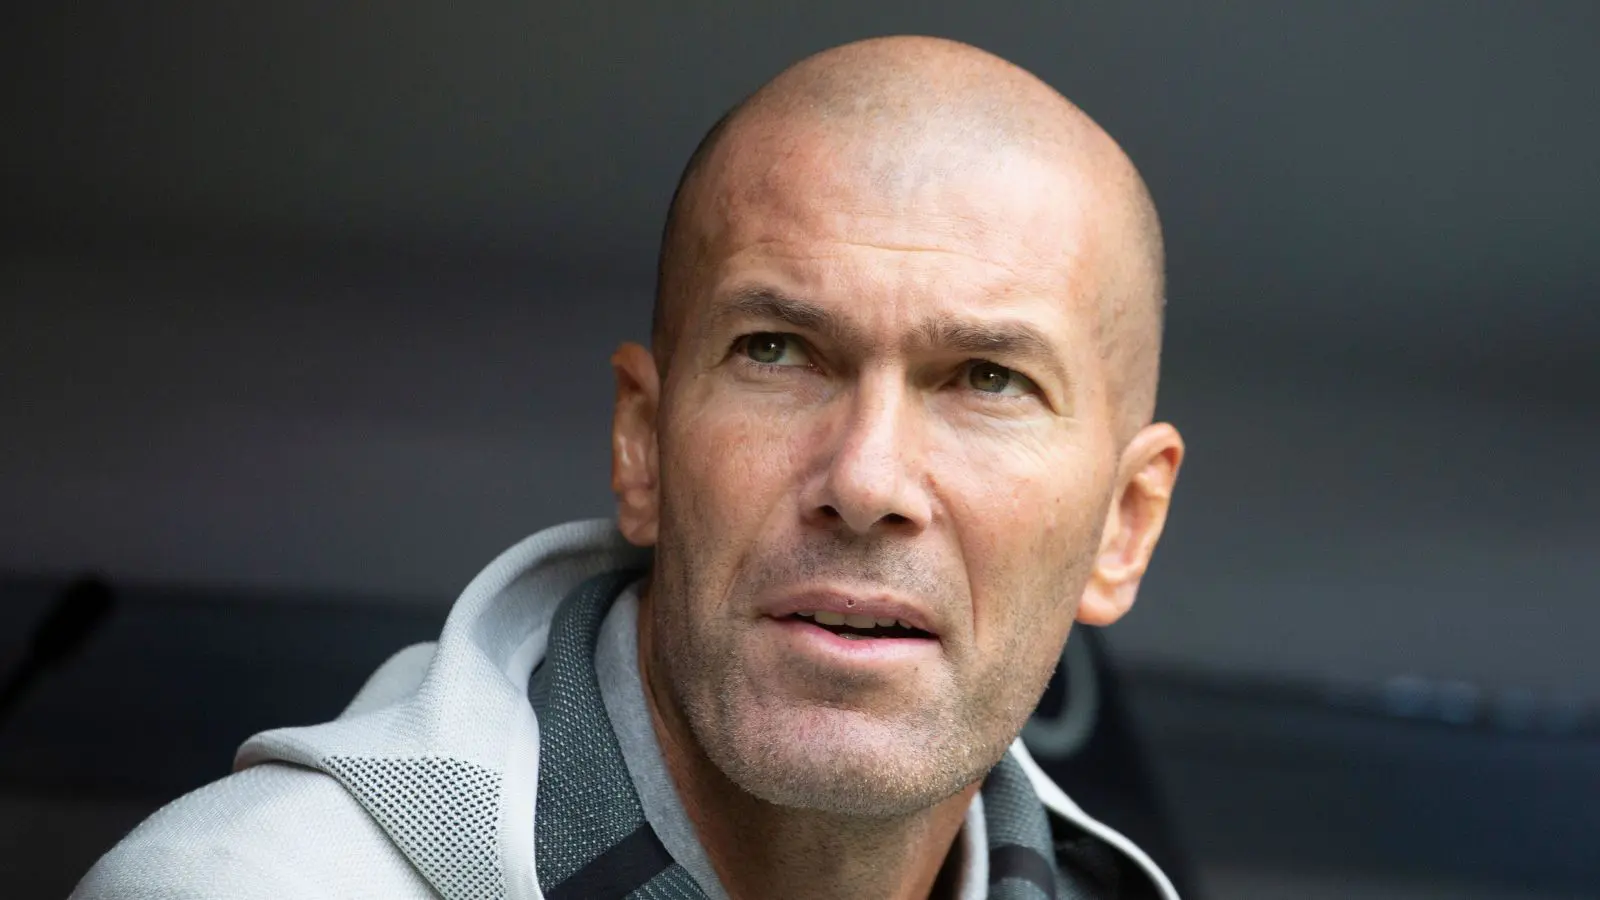 EPL: Zidane despises Manchester United, says he can only manage three teams - Gravesen